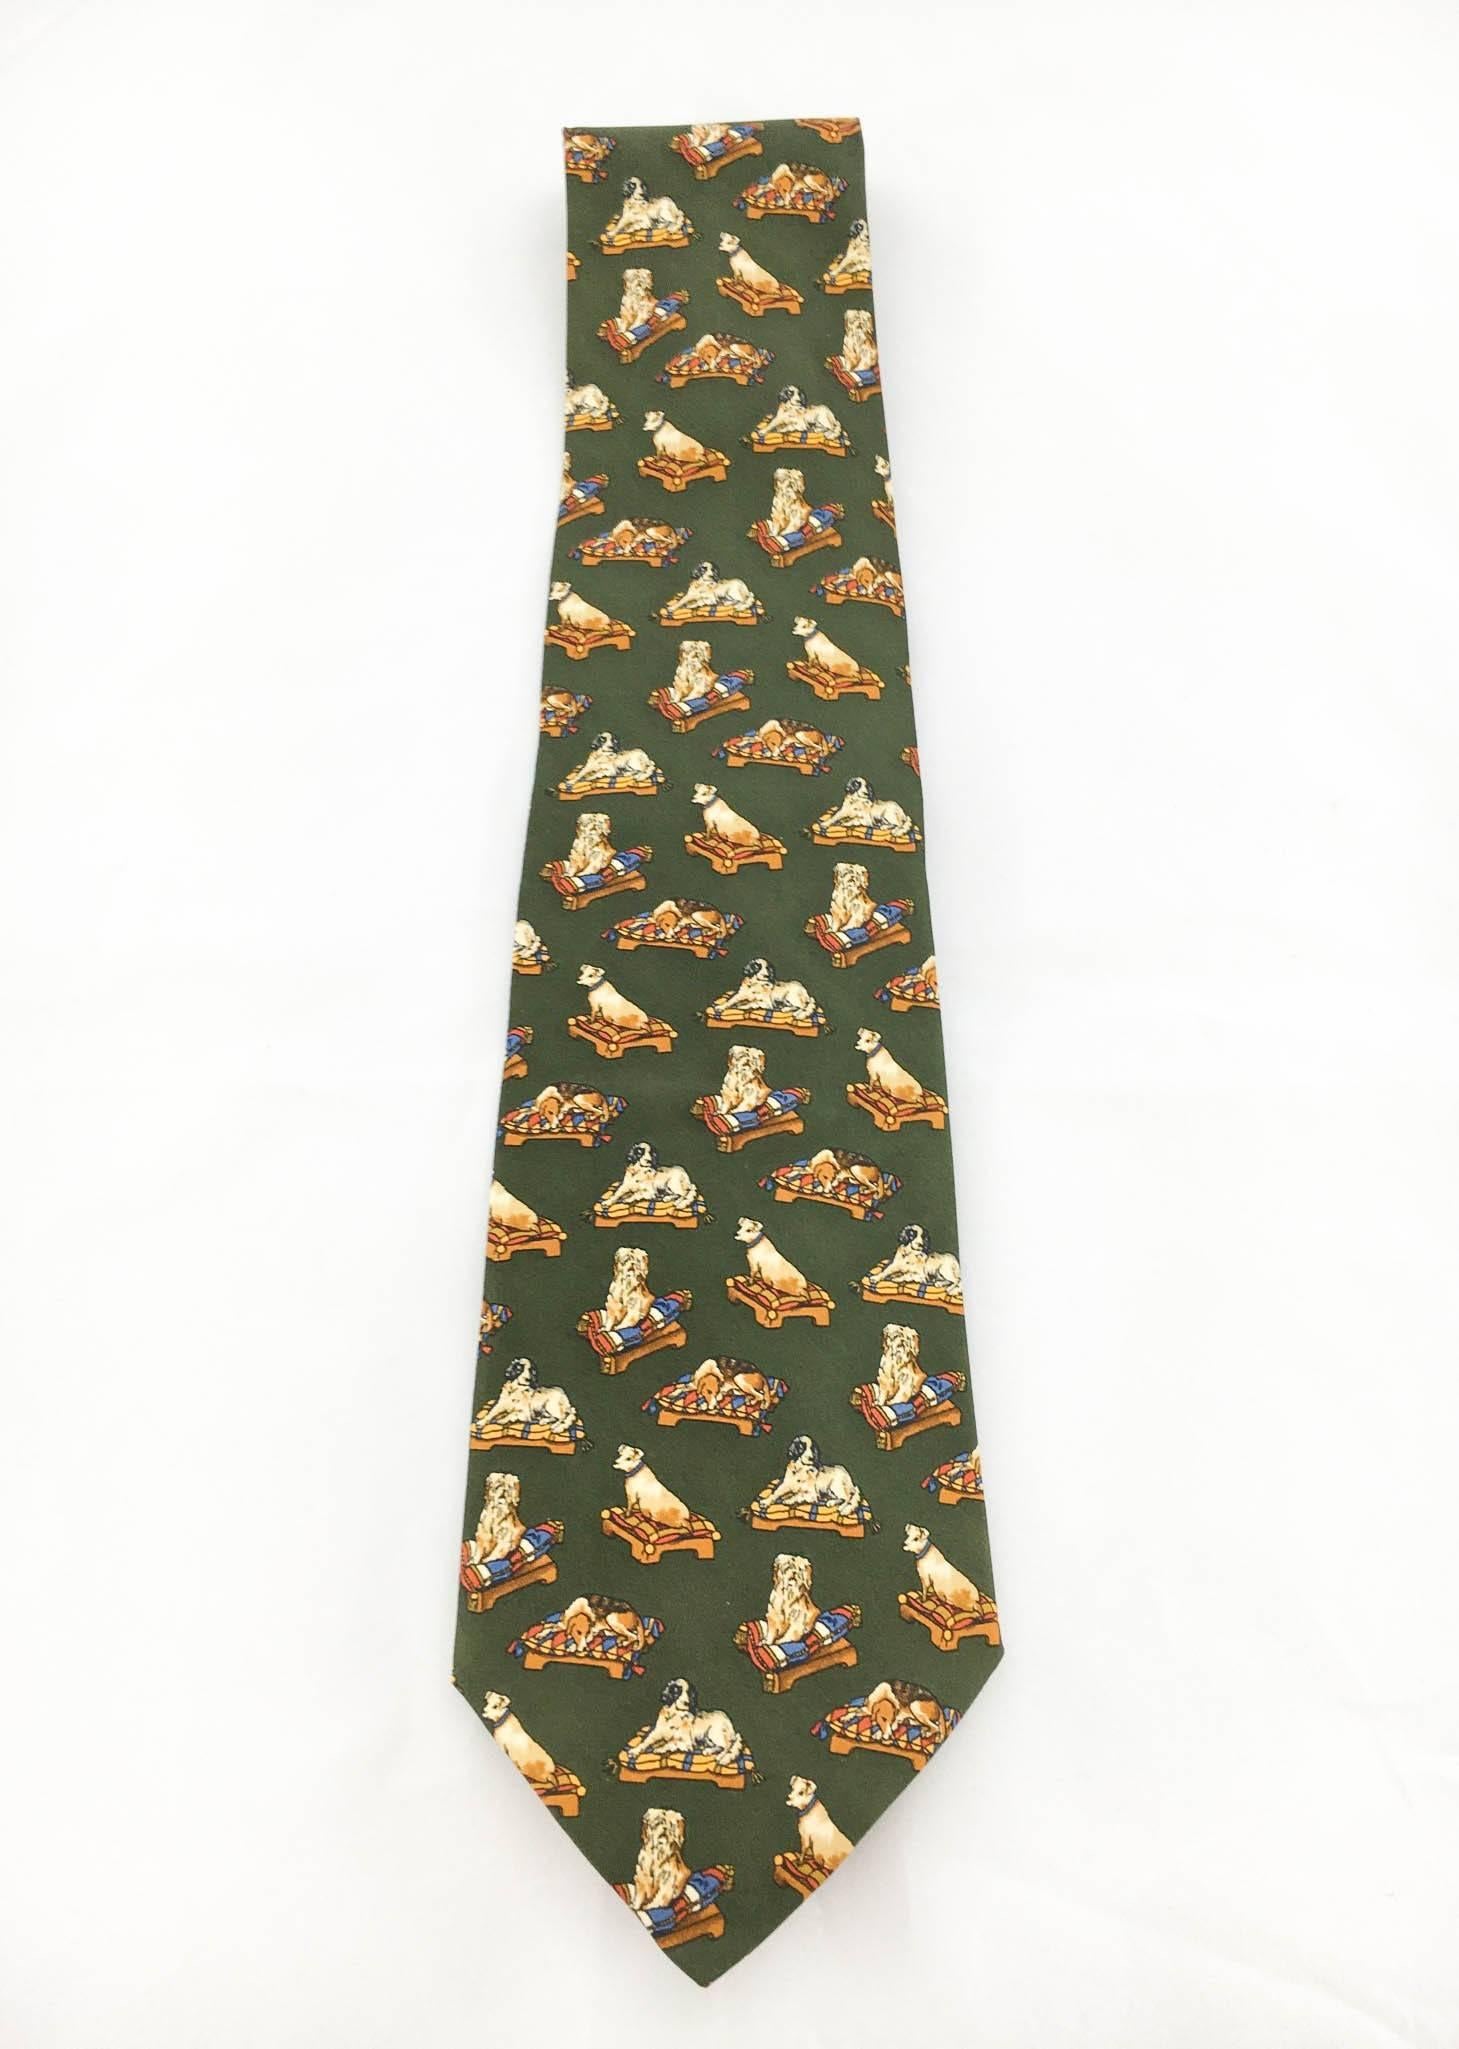 Stylish Salvatore Ferragamo ‘resting dogs’ tie. This beautiful tie in military green features dogs laying on cushioned beds. In pure silk, this tie a perfect way to add a little bit of quirkiness to a serious look maintaining the elegance. 

Label